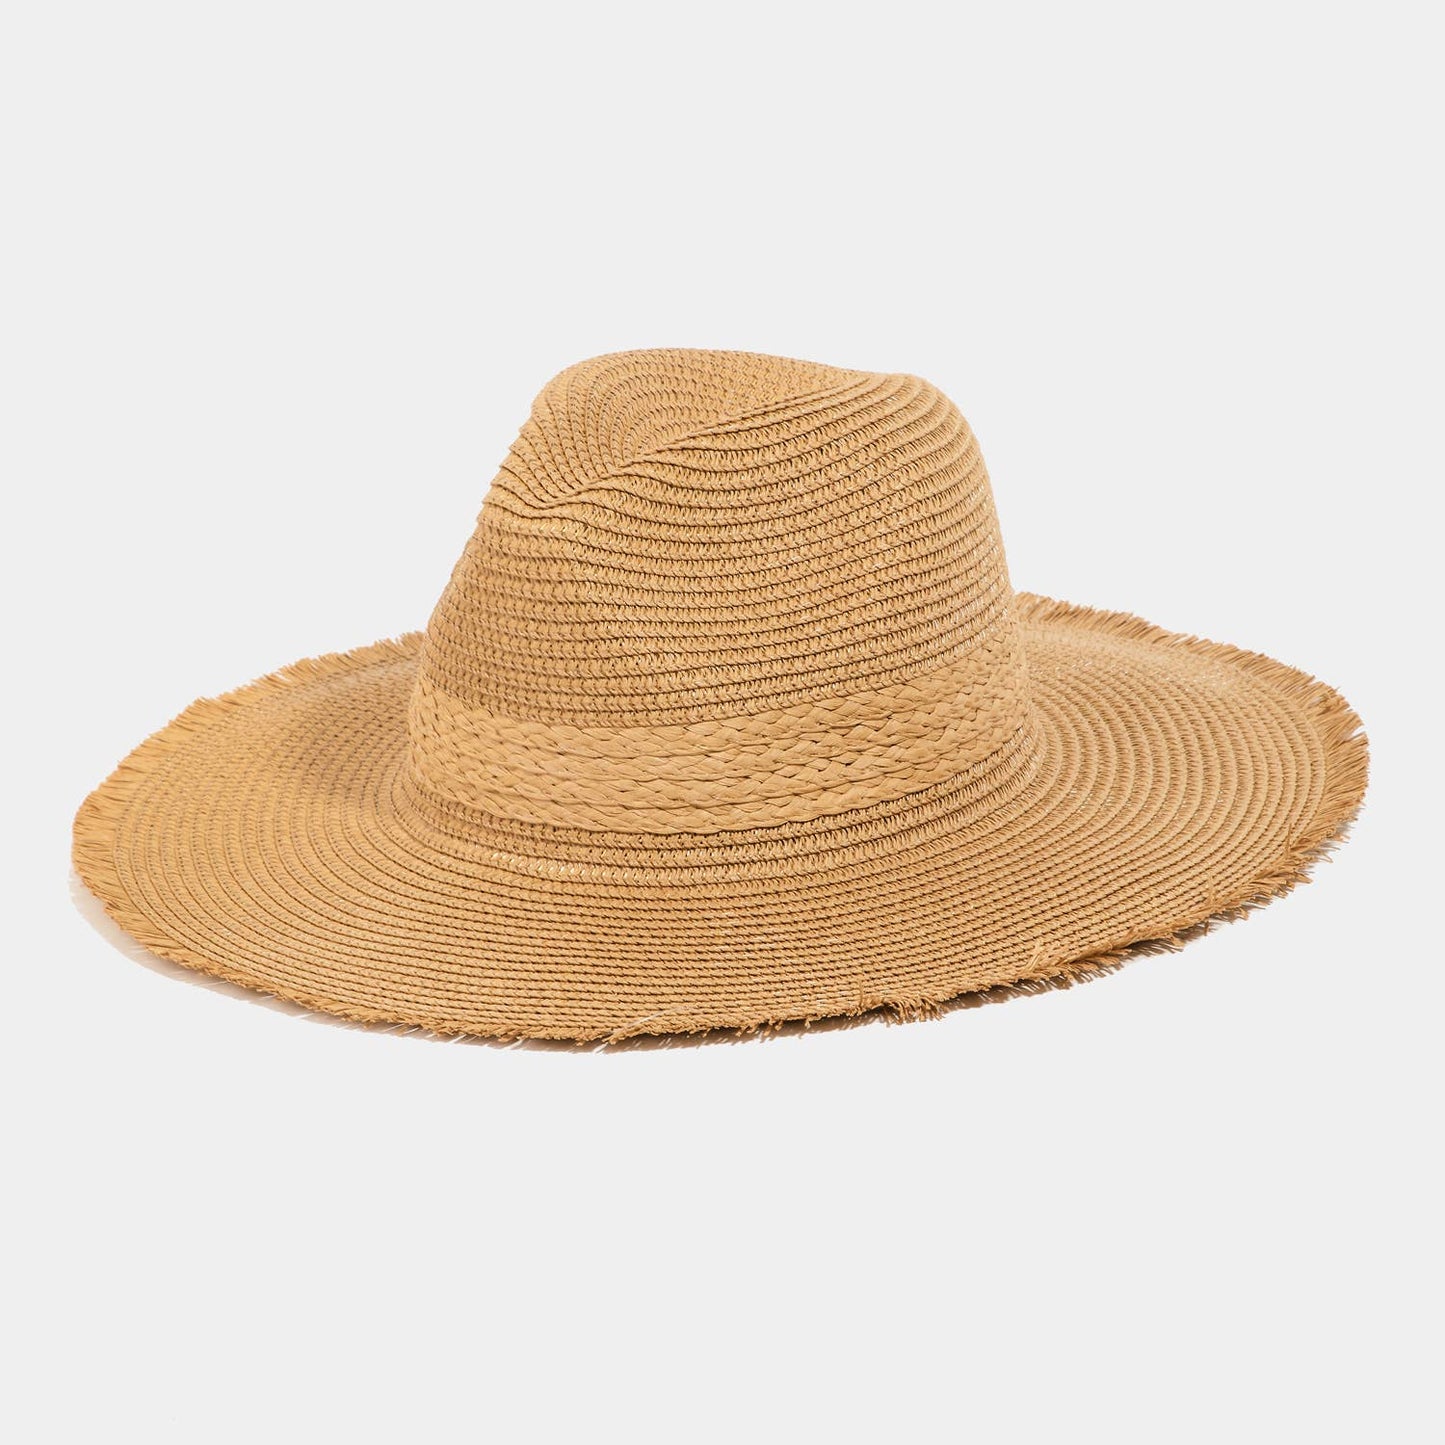 Collections by Fame Accessories - Flat Brim Straw Braided Strap Sun Hat - CLASSY CLOSET BOUTIQUECollections by Fame Accessories - Flat Brim Straw Braided Strap Sun HatBAGS & ACCESSORIESMMT8970KA